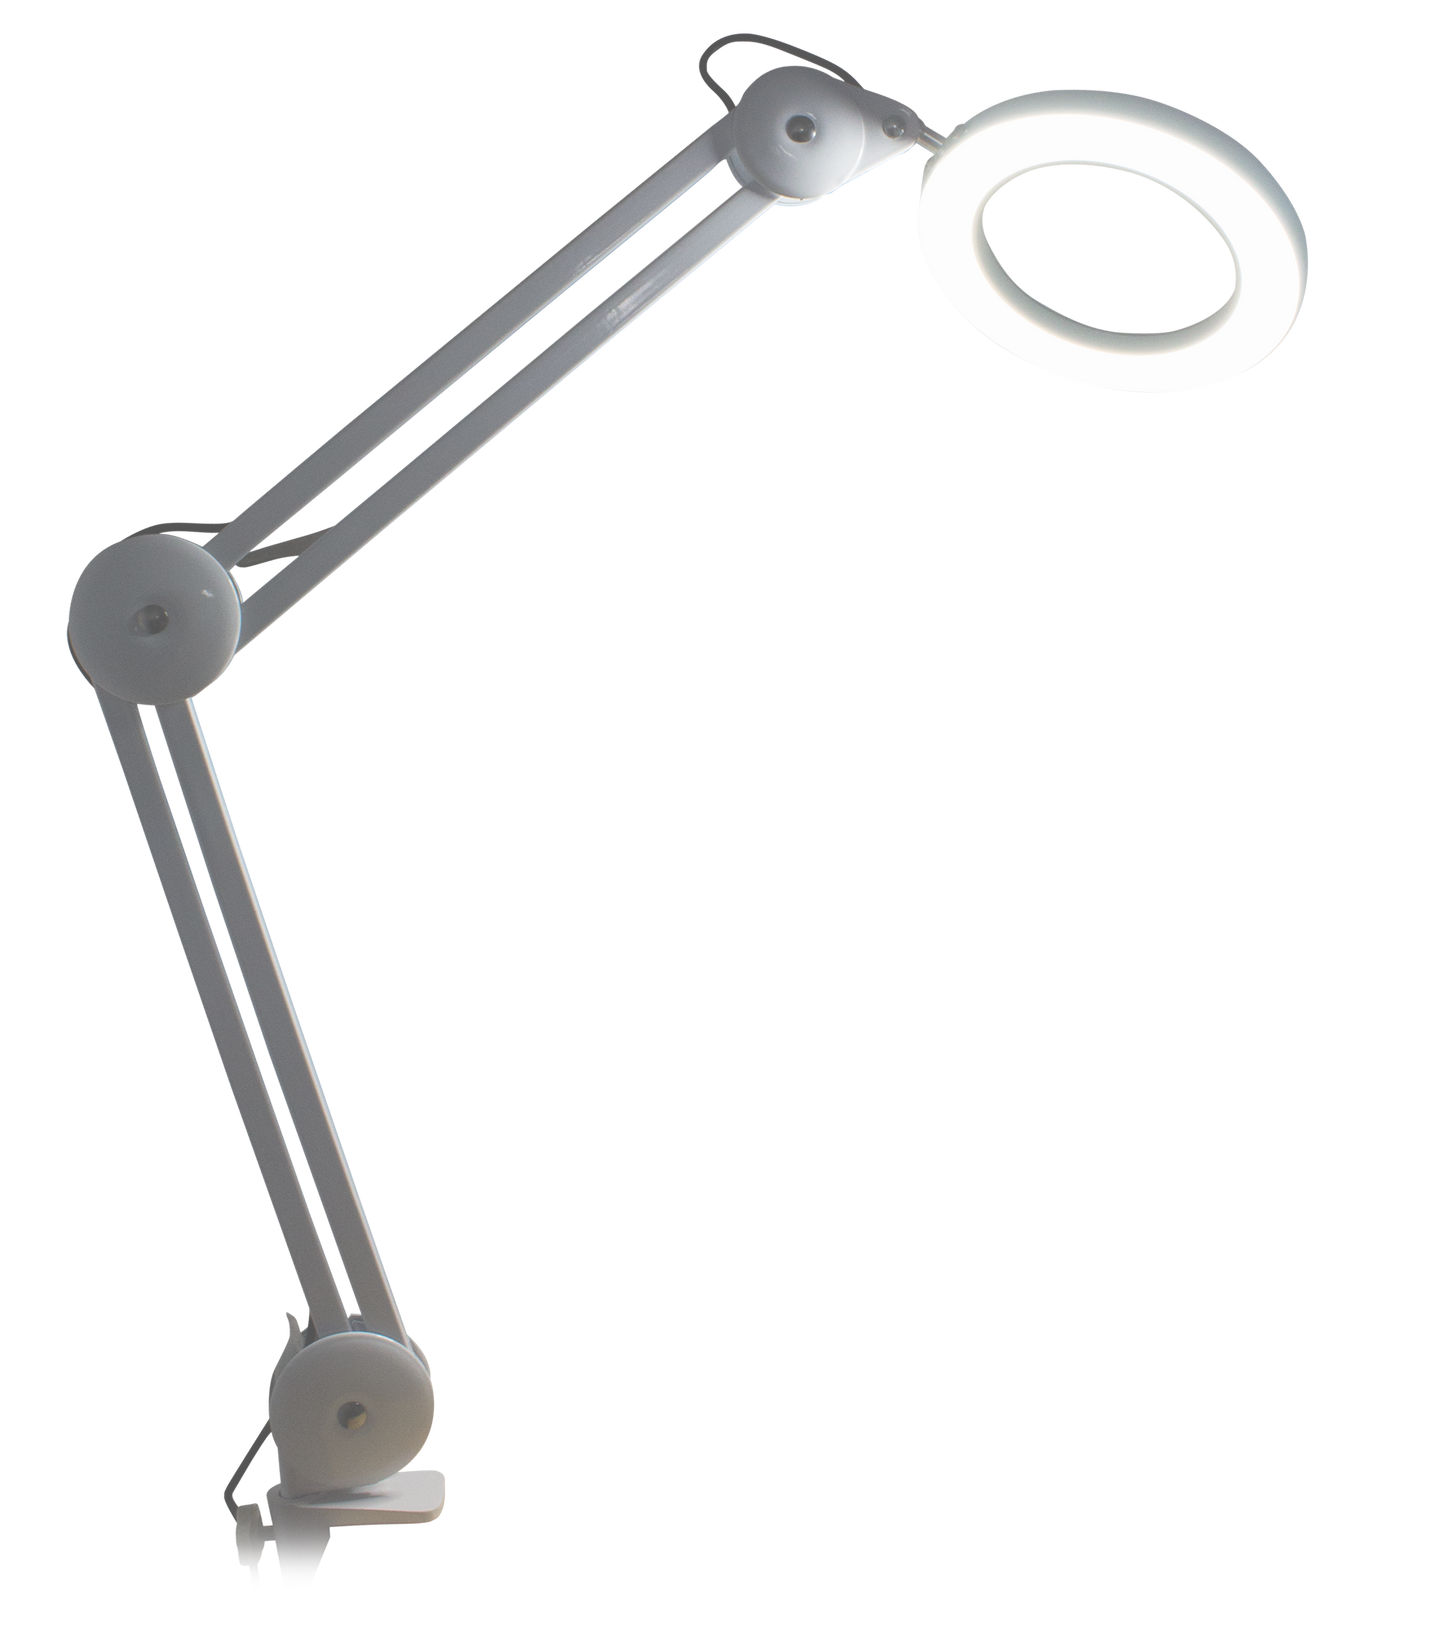 Native Lighting - White Chameleon Mini USB Lamp (1.75x magnification with dimmable 3 colour temperatures)